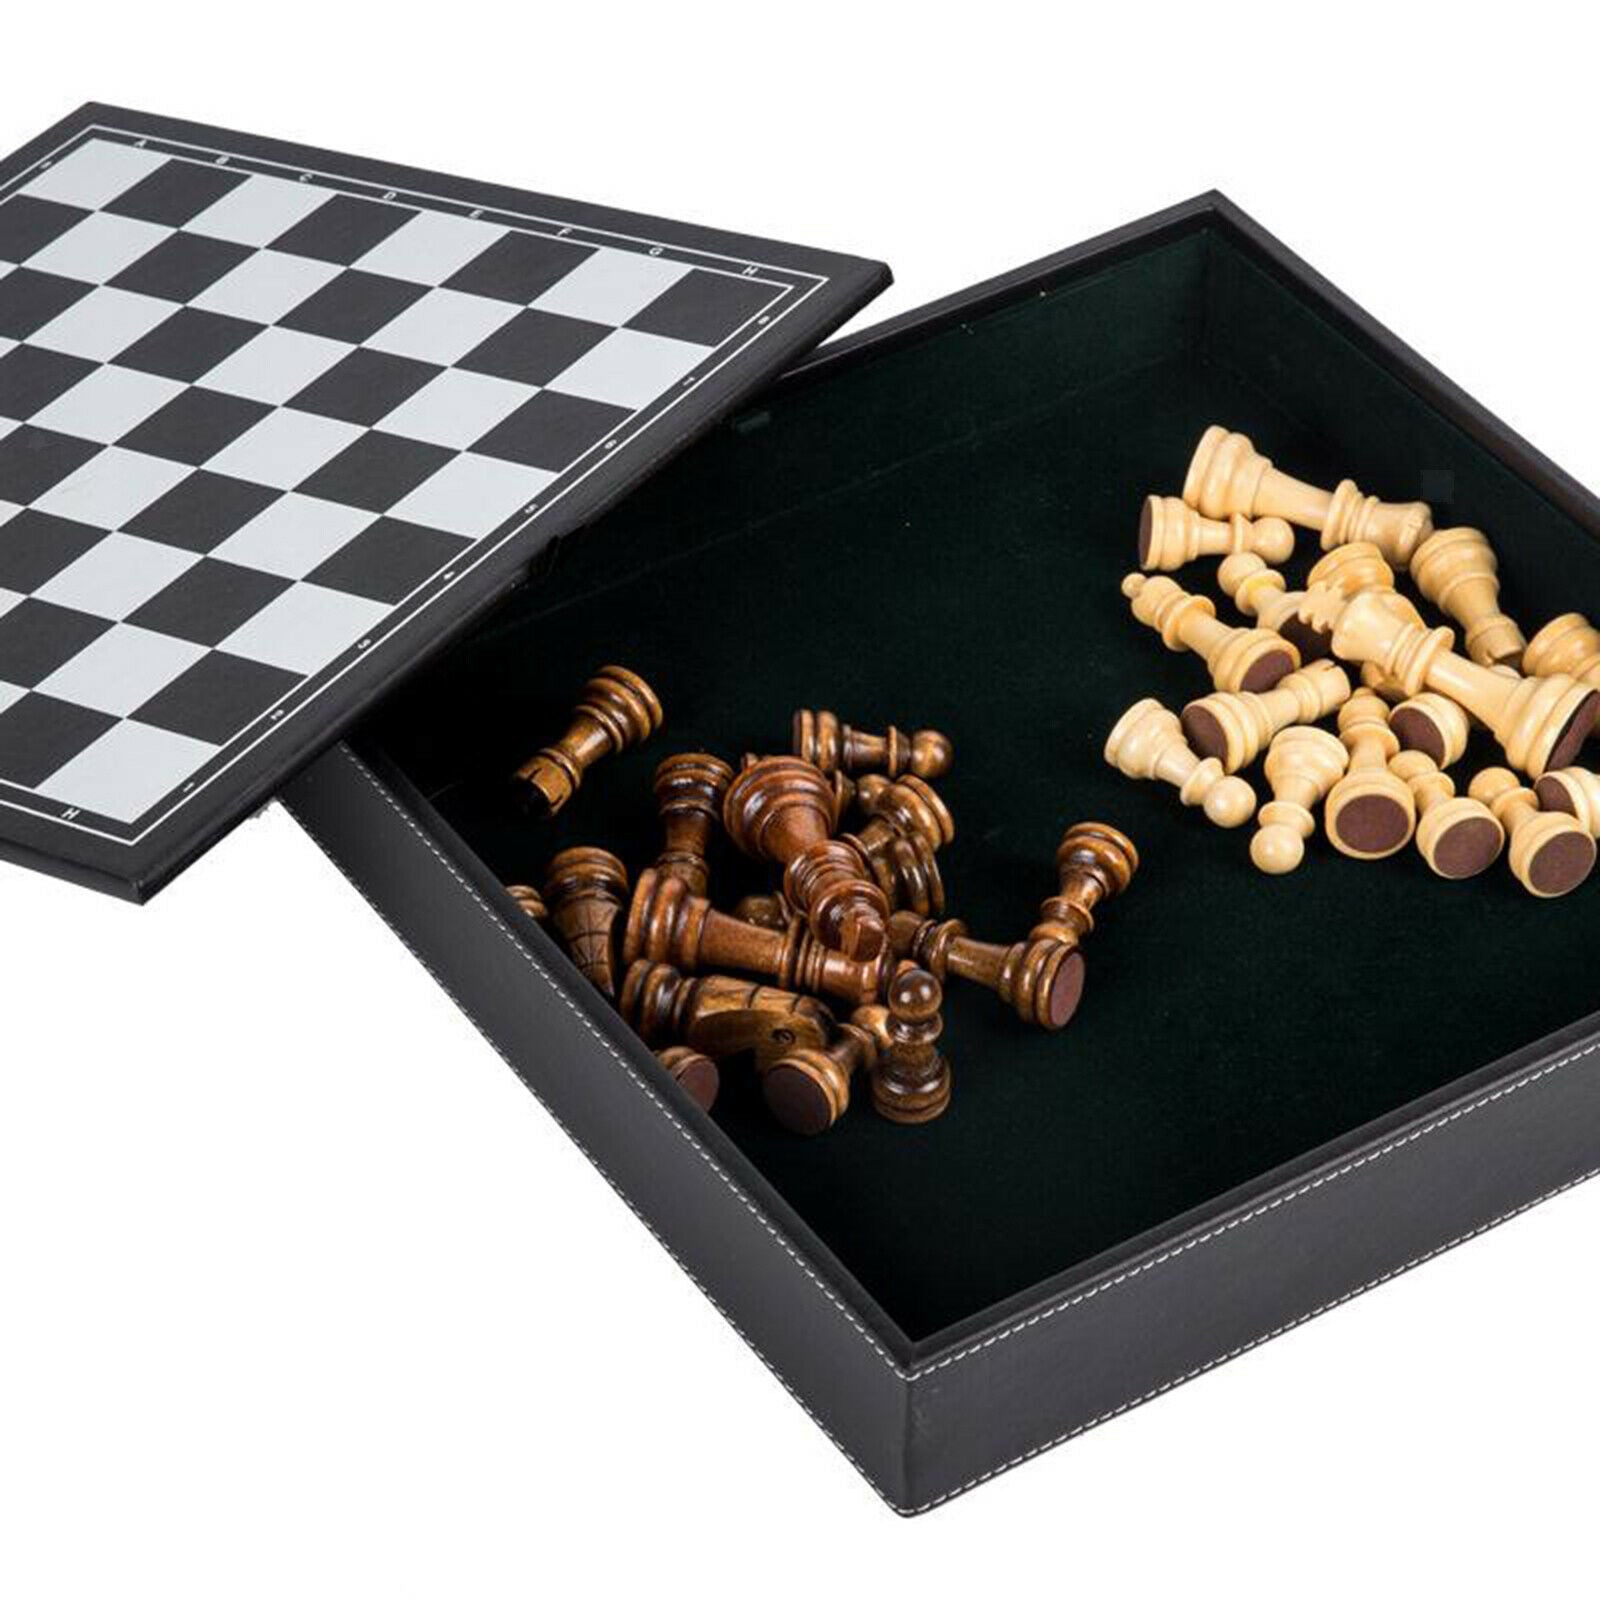 Wooden Chess Set for Kids and Adults Large Chess Board Game Sets Storage for